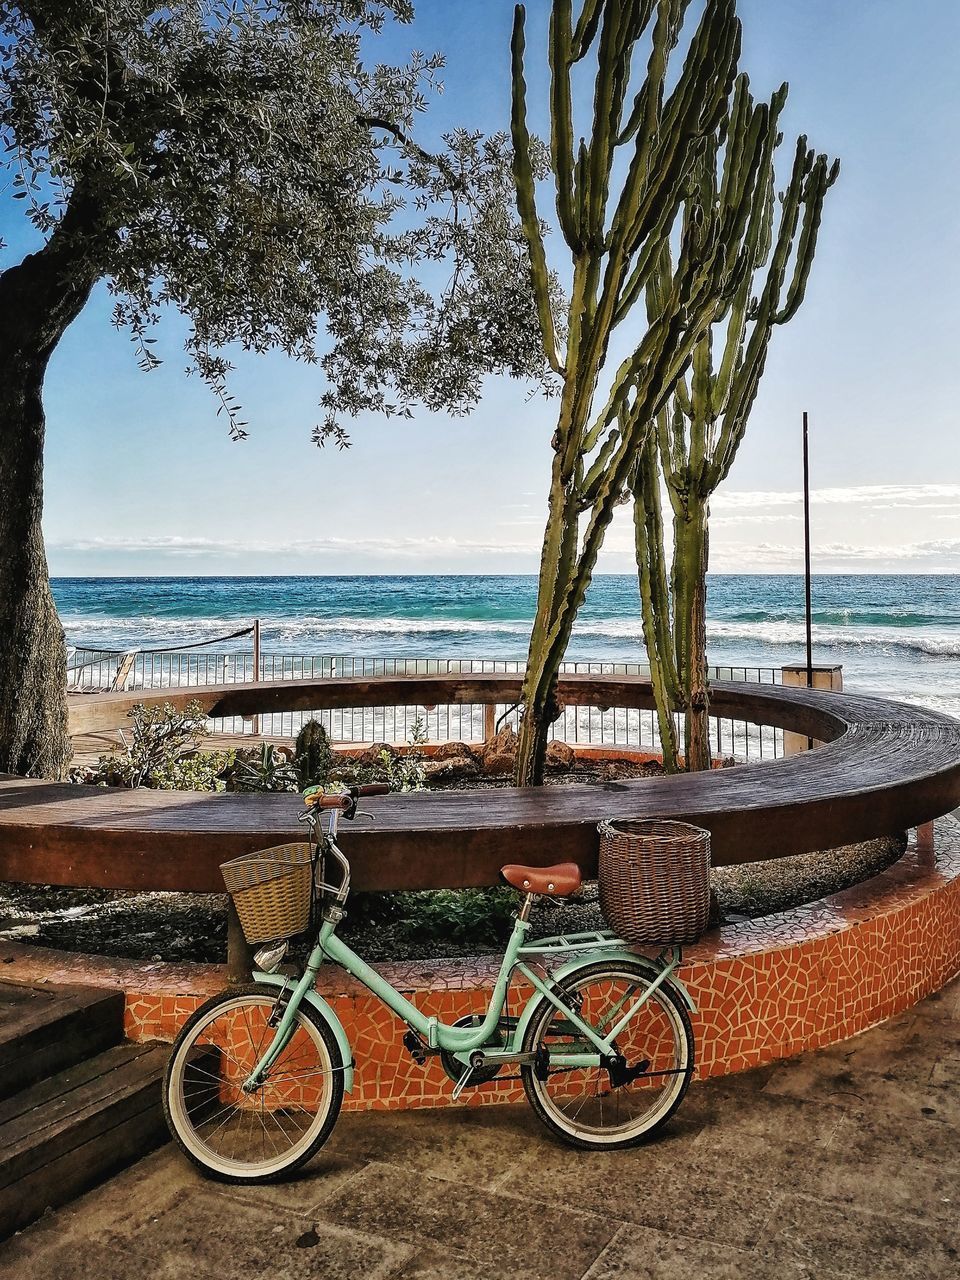 BICYCLES ON BEACH AGAINST SEA